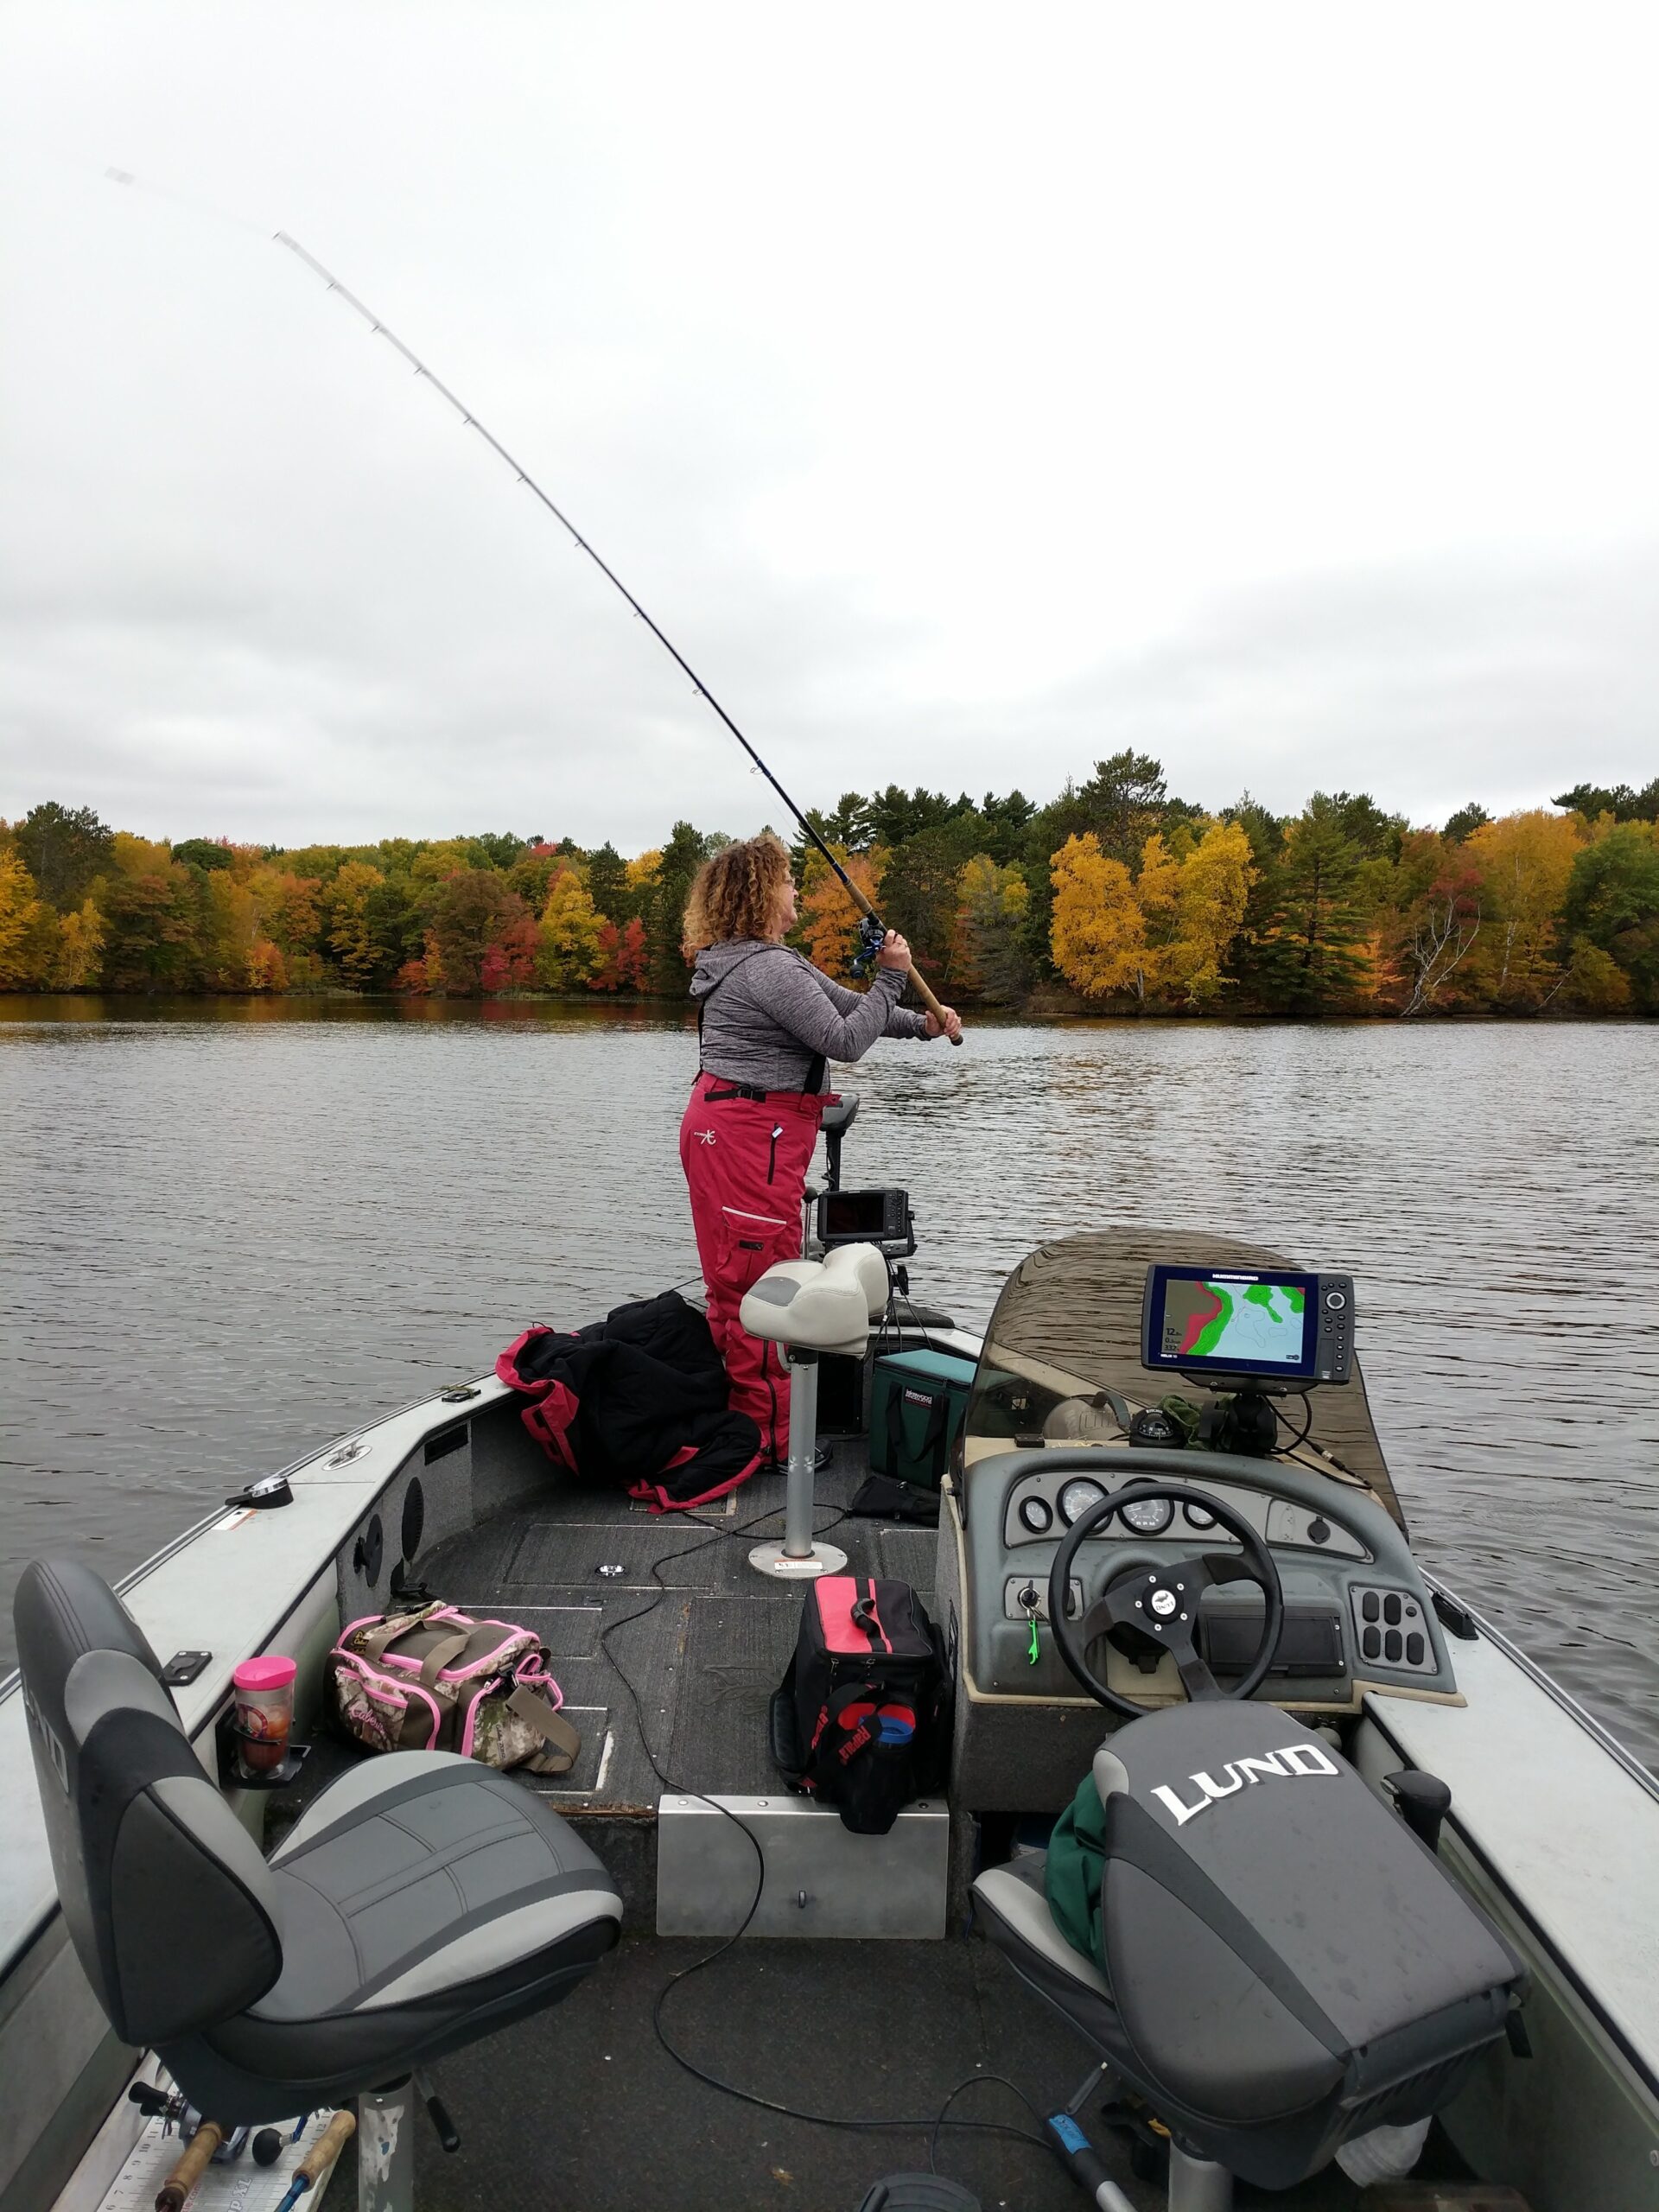 Ladies' Musky Fishing School participant casts her reel